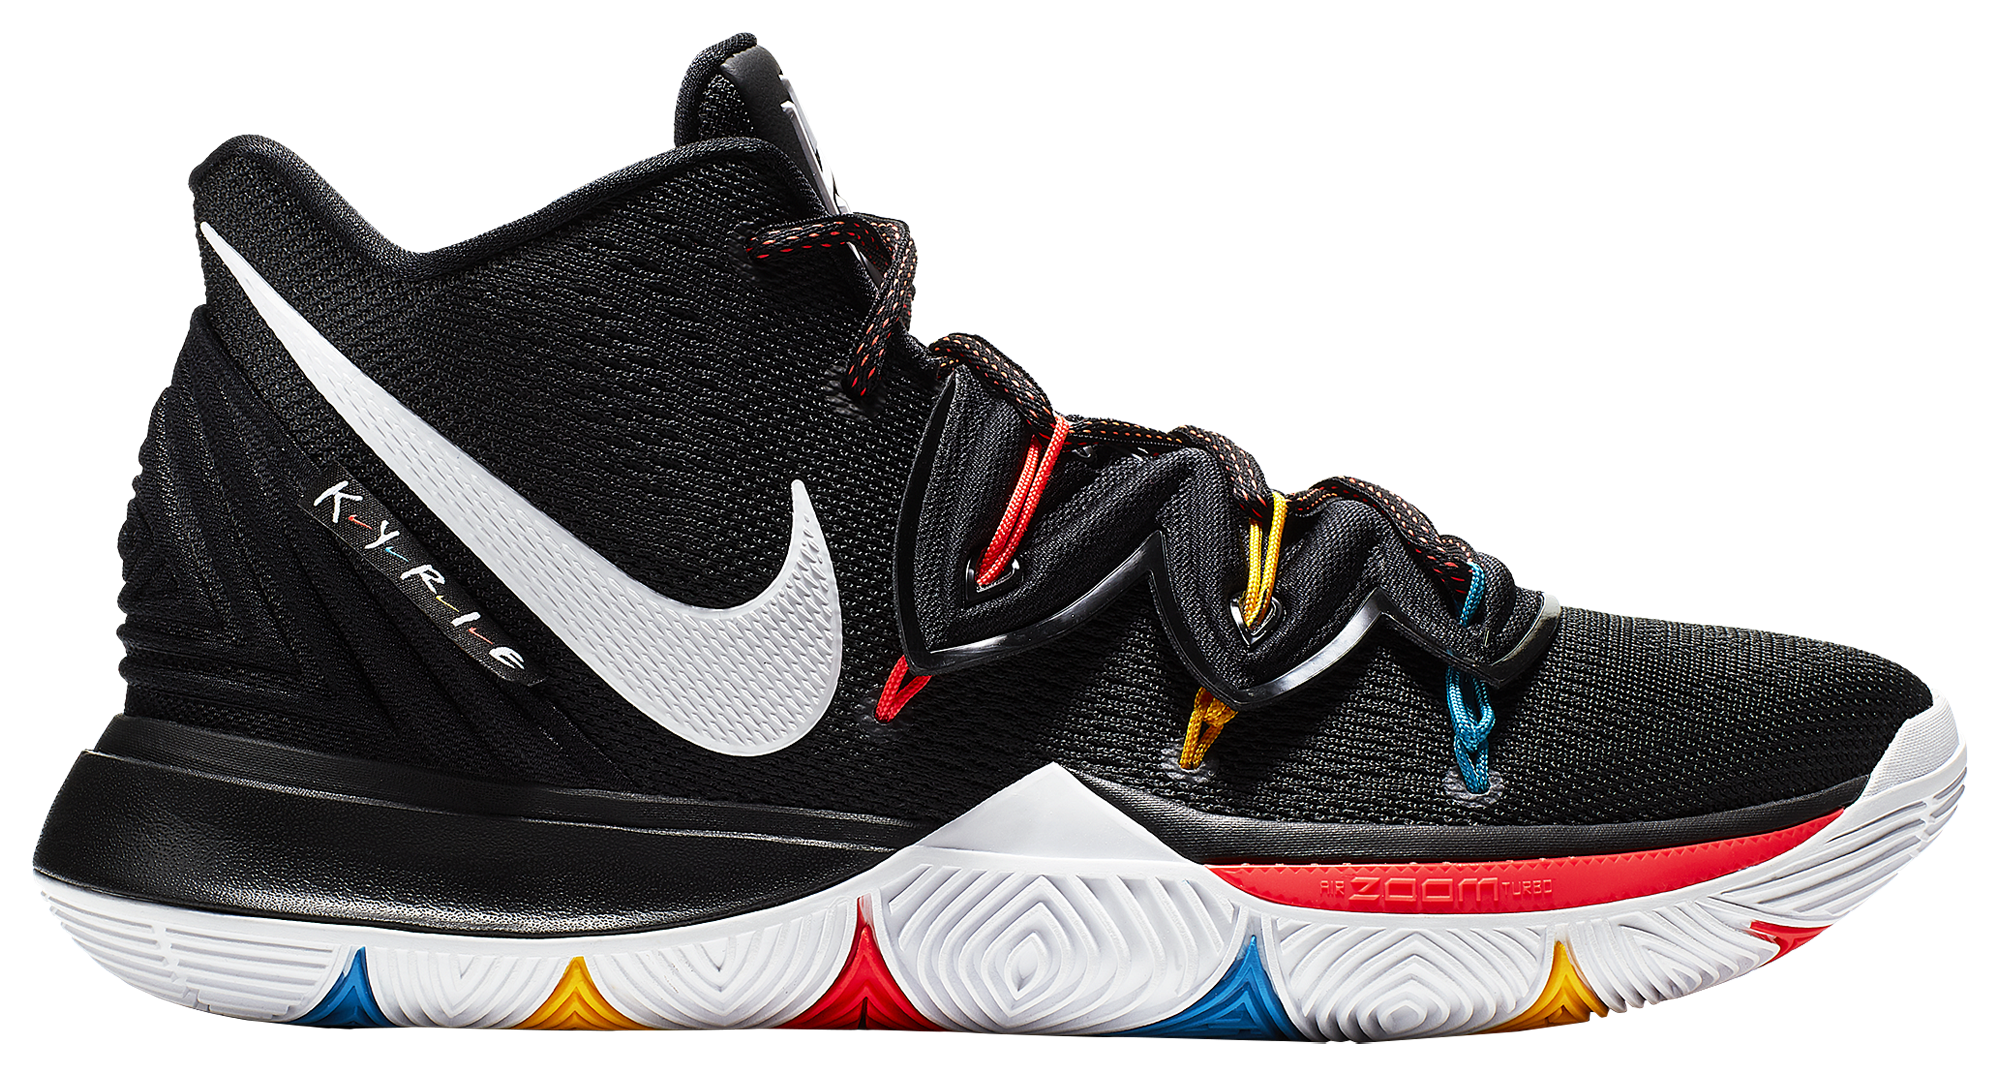 Black falcon KYRIE NIKE BY YOU Unchaining KYRIE 6